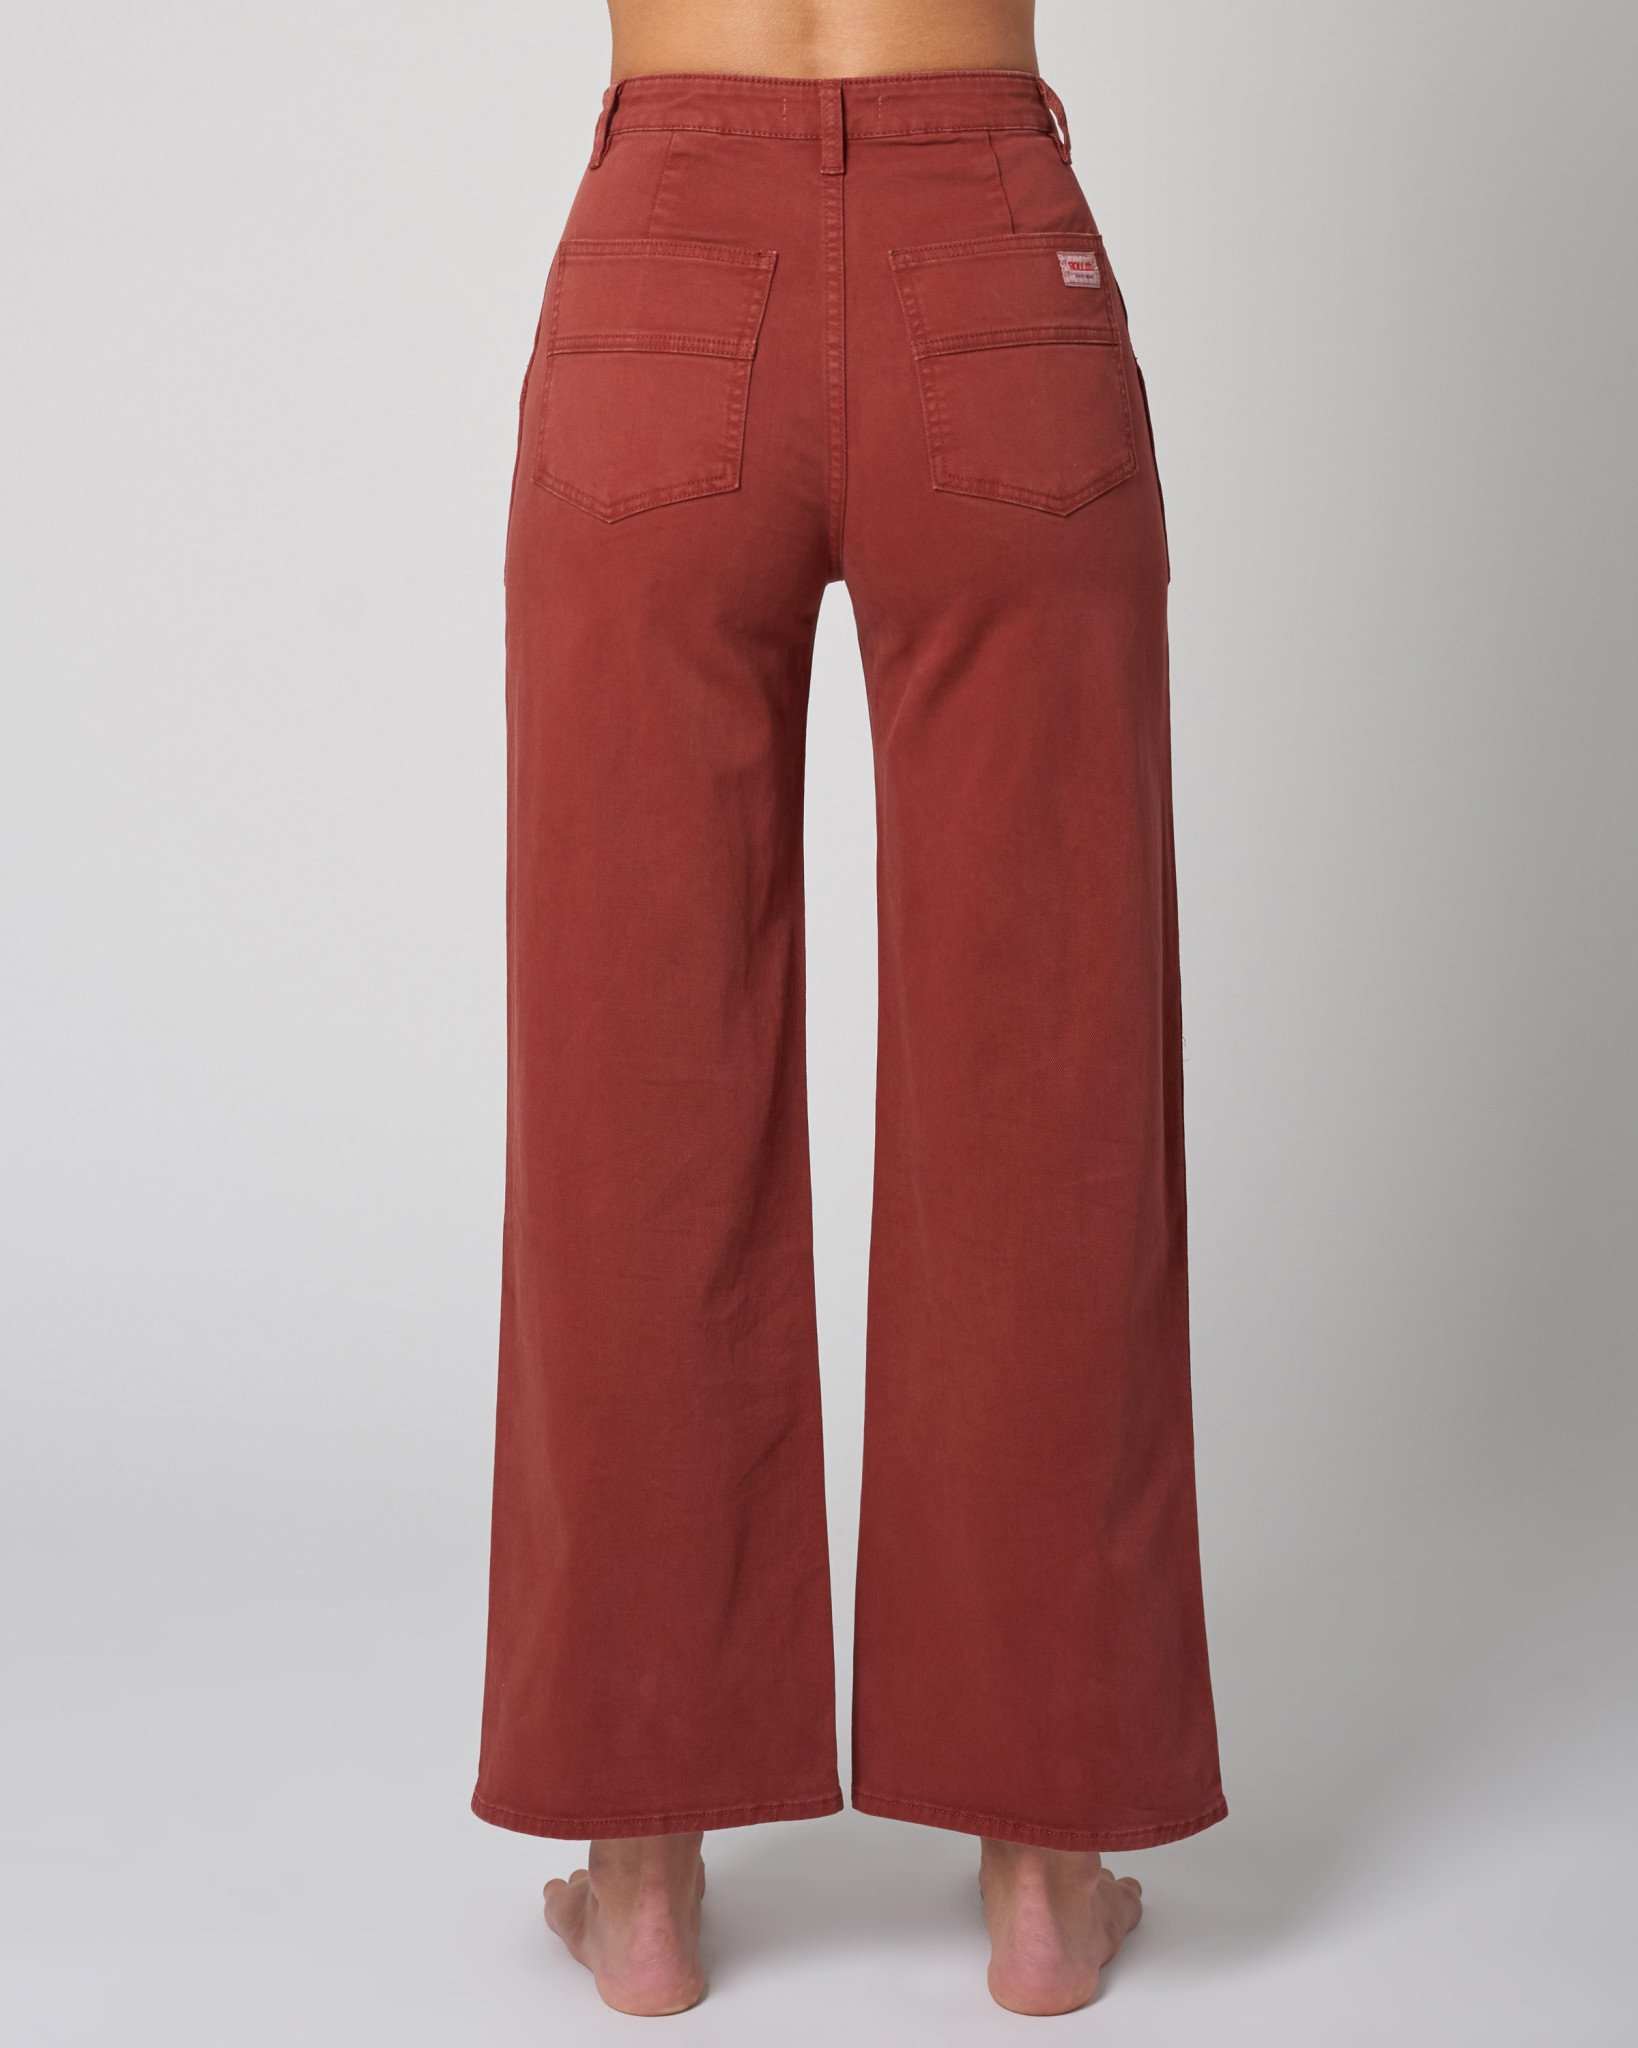 Rolla's Jeans Rollas Heidi Trade Pant